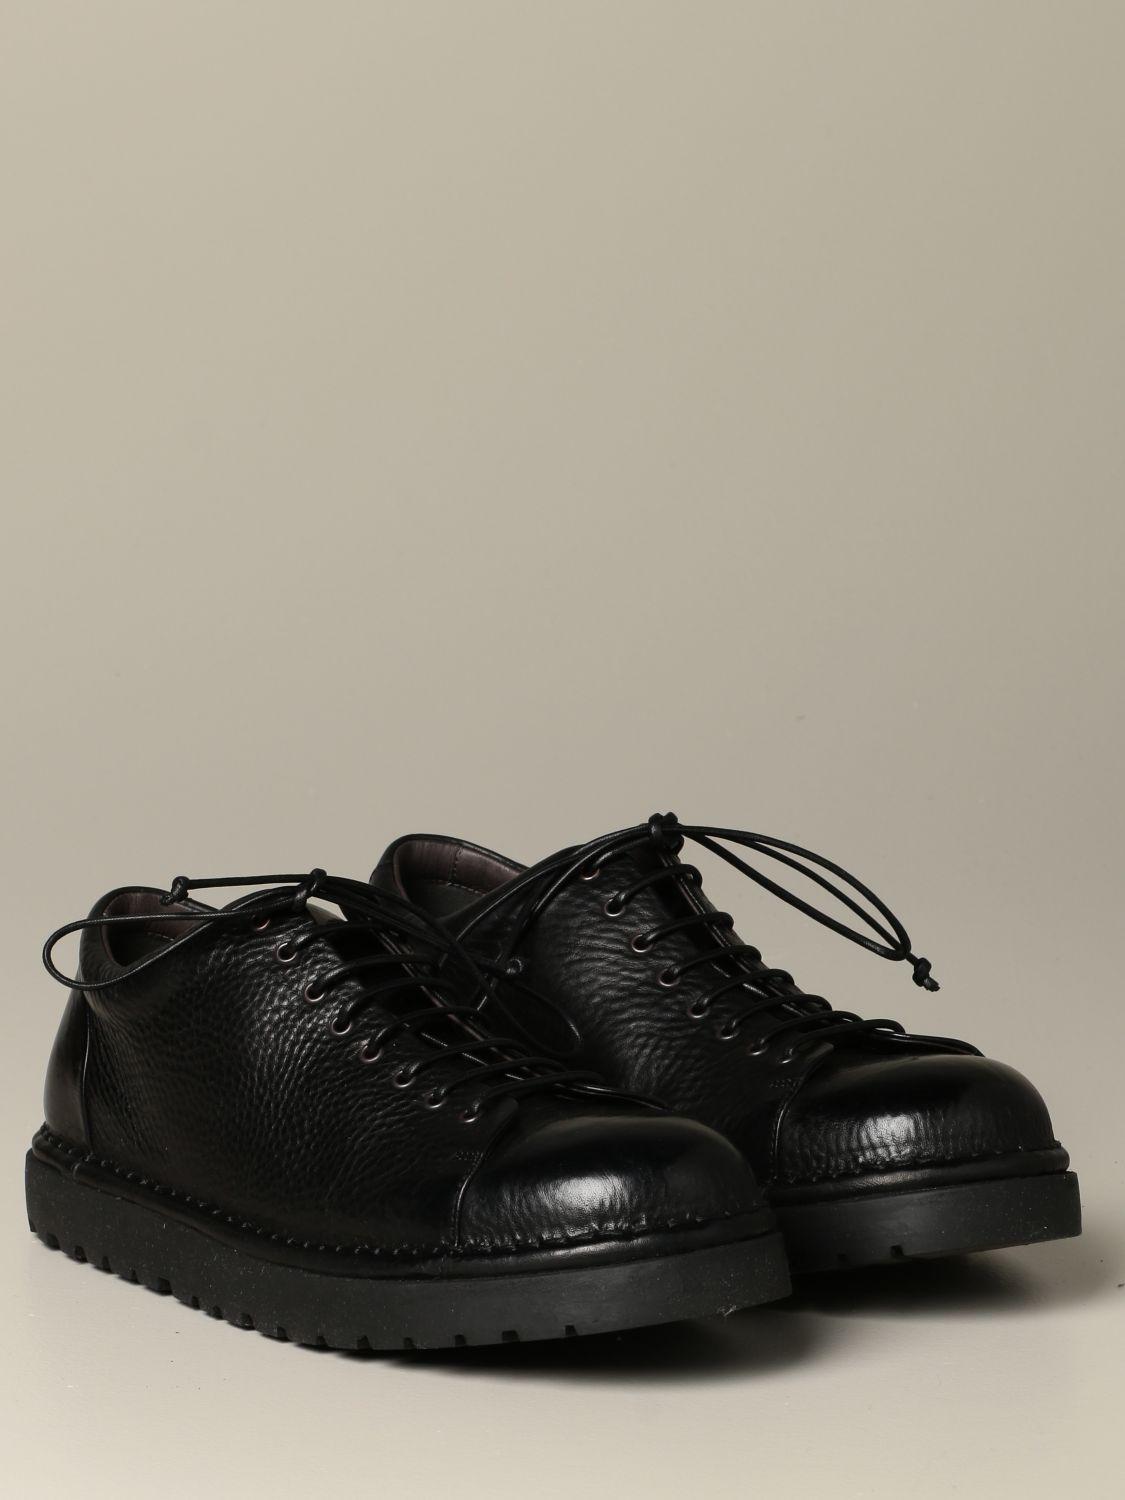 Marsèll Brogue Shoes in Black for Men - Lyst